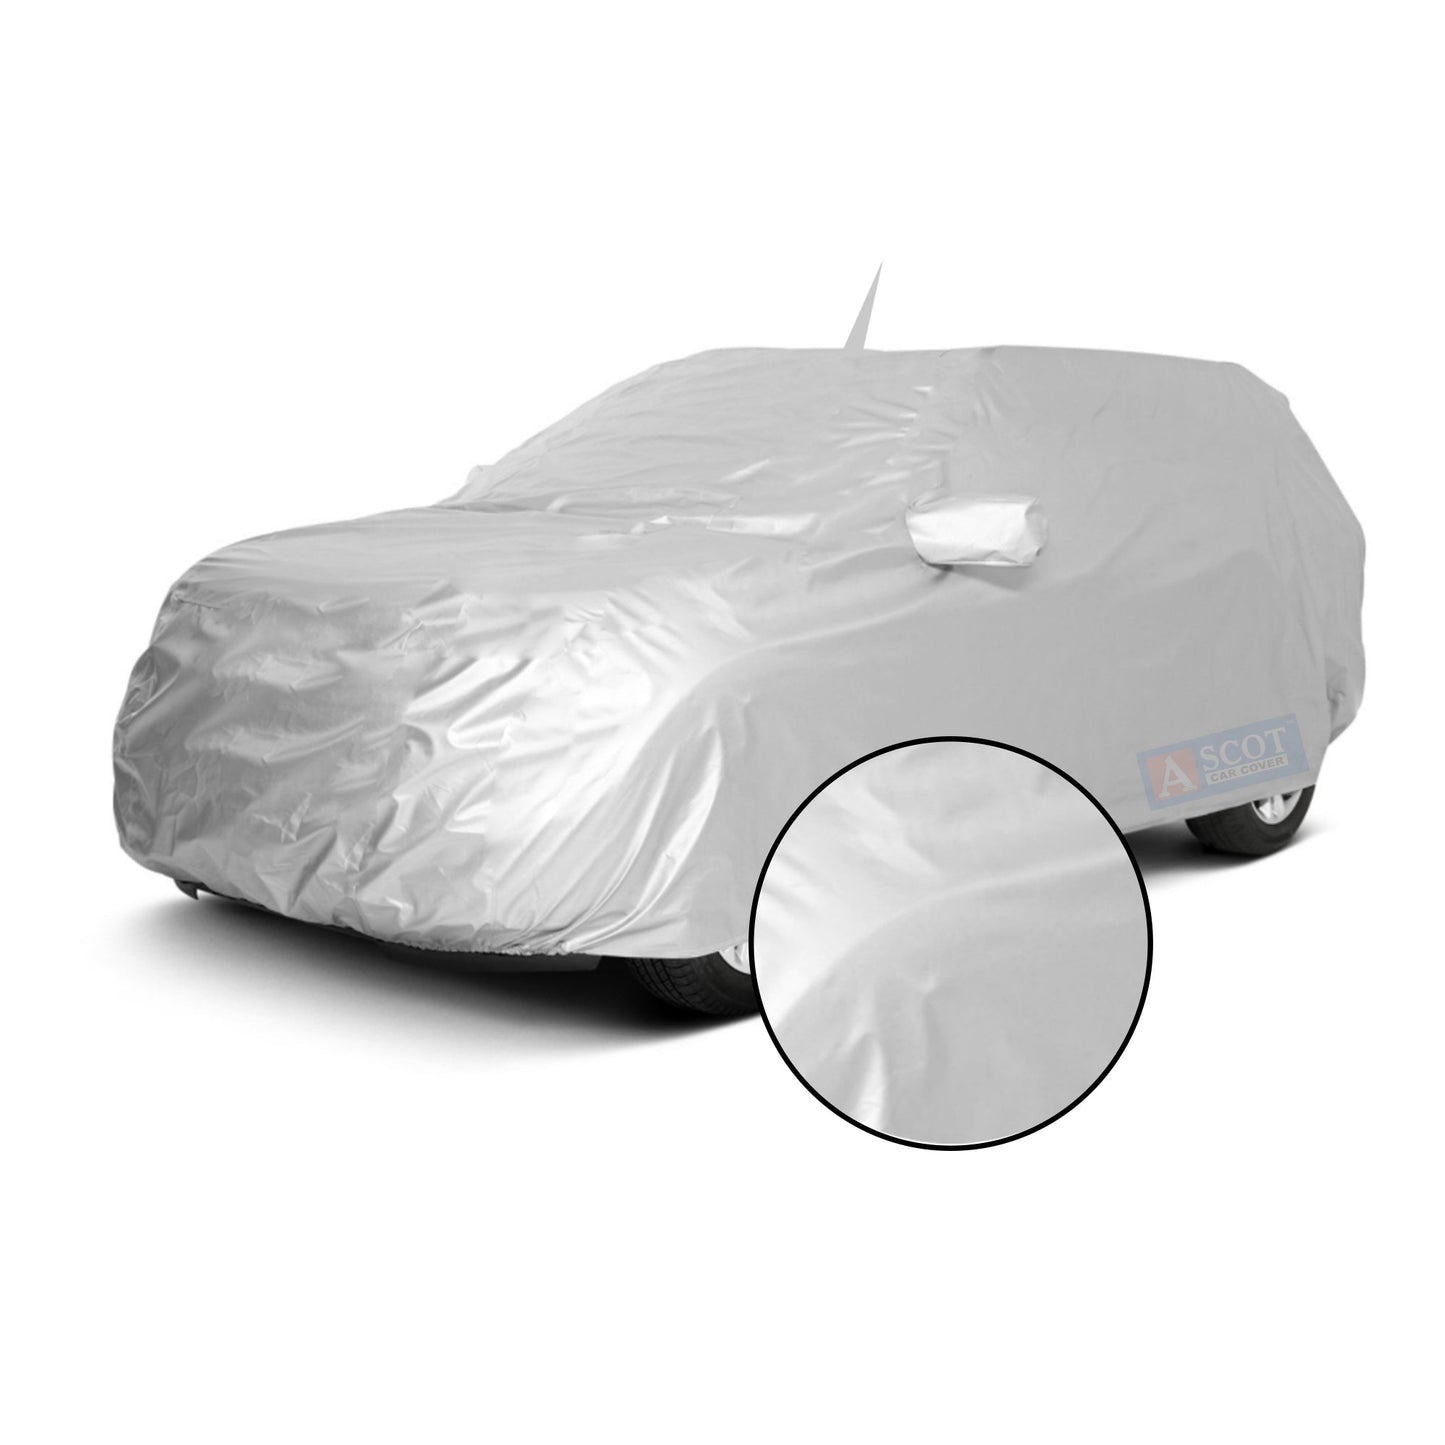 Ascot Audi RSQ8 2019-2023 Model Car Body Cover Dust Proof, Trippel Stitched